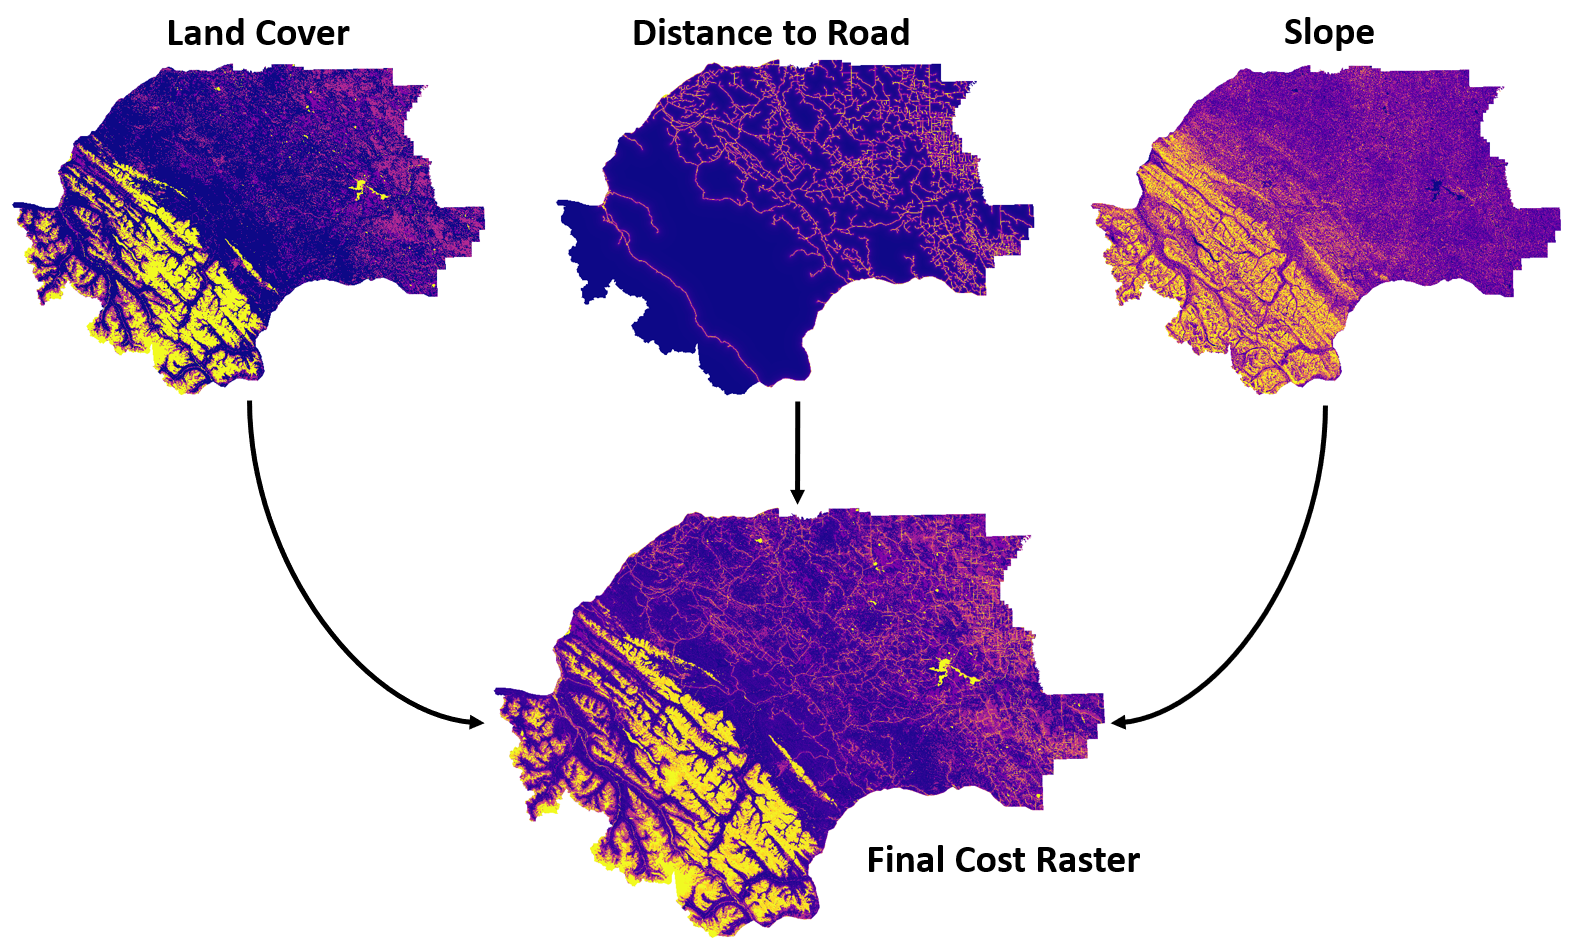 Example of calculating a cost raster using three factors in the Yellowhead Grizzly Bear Management Area of Alerta, Canada: land cover, distance to road, and terrain slope. Pickell, CC-BY-SA-4.0.